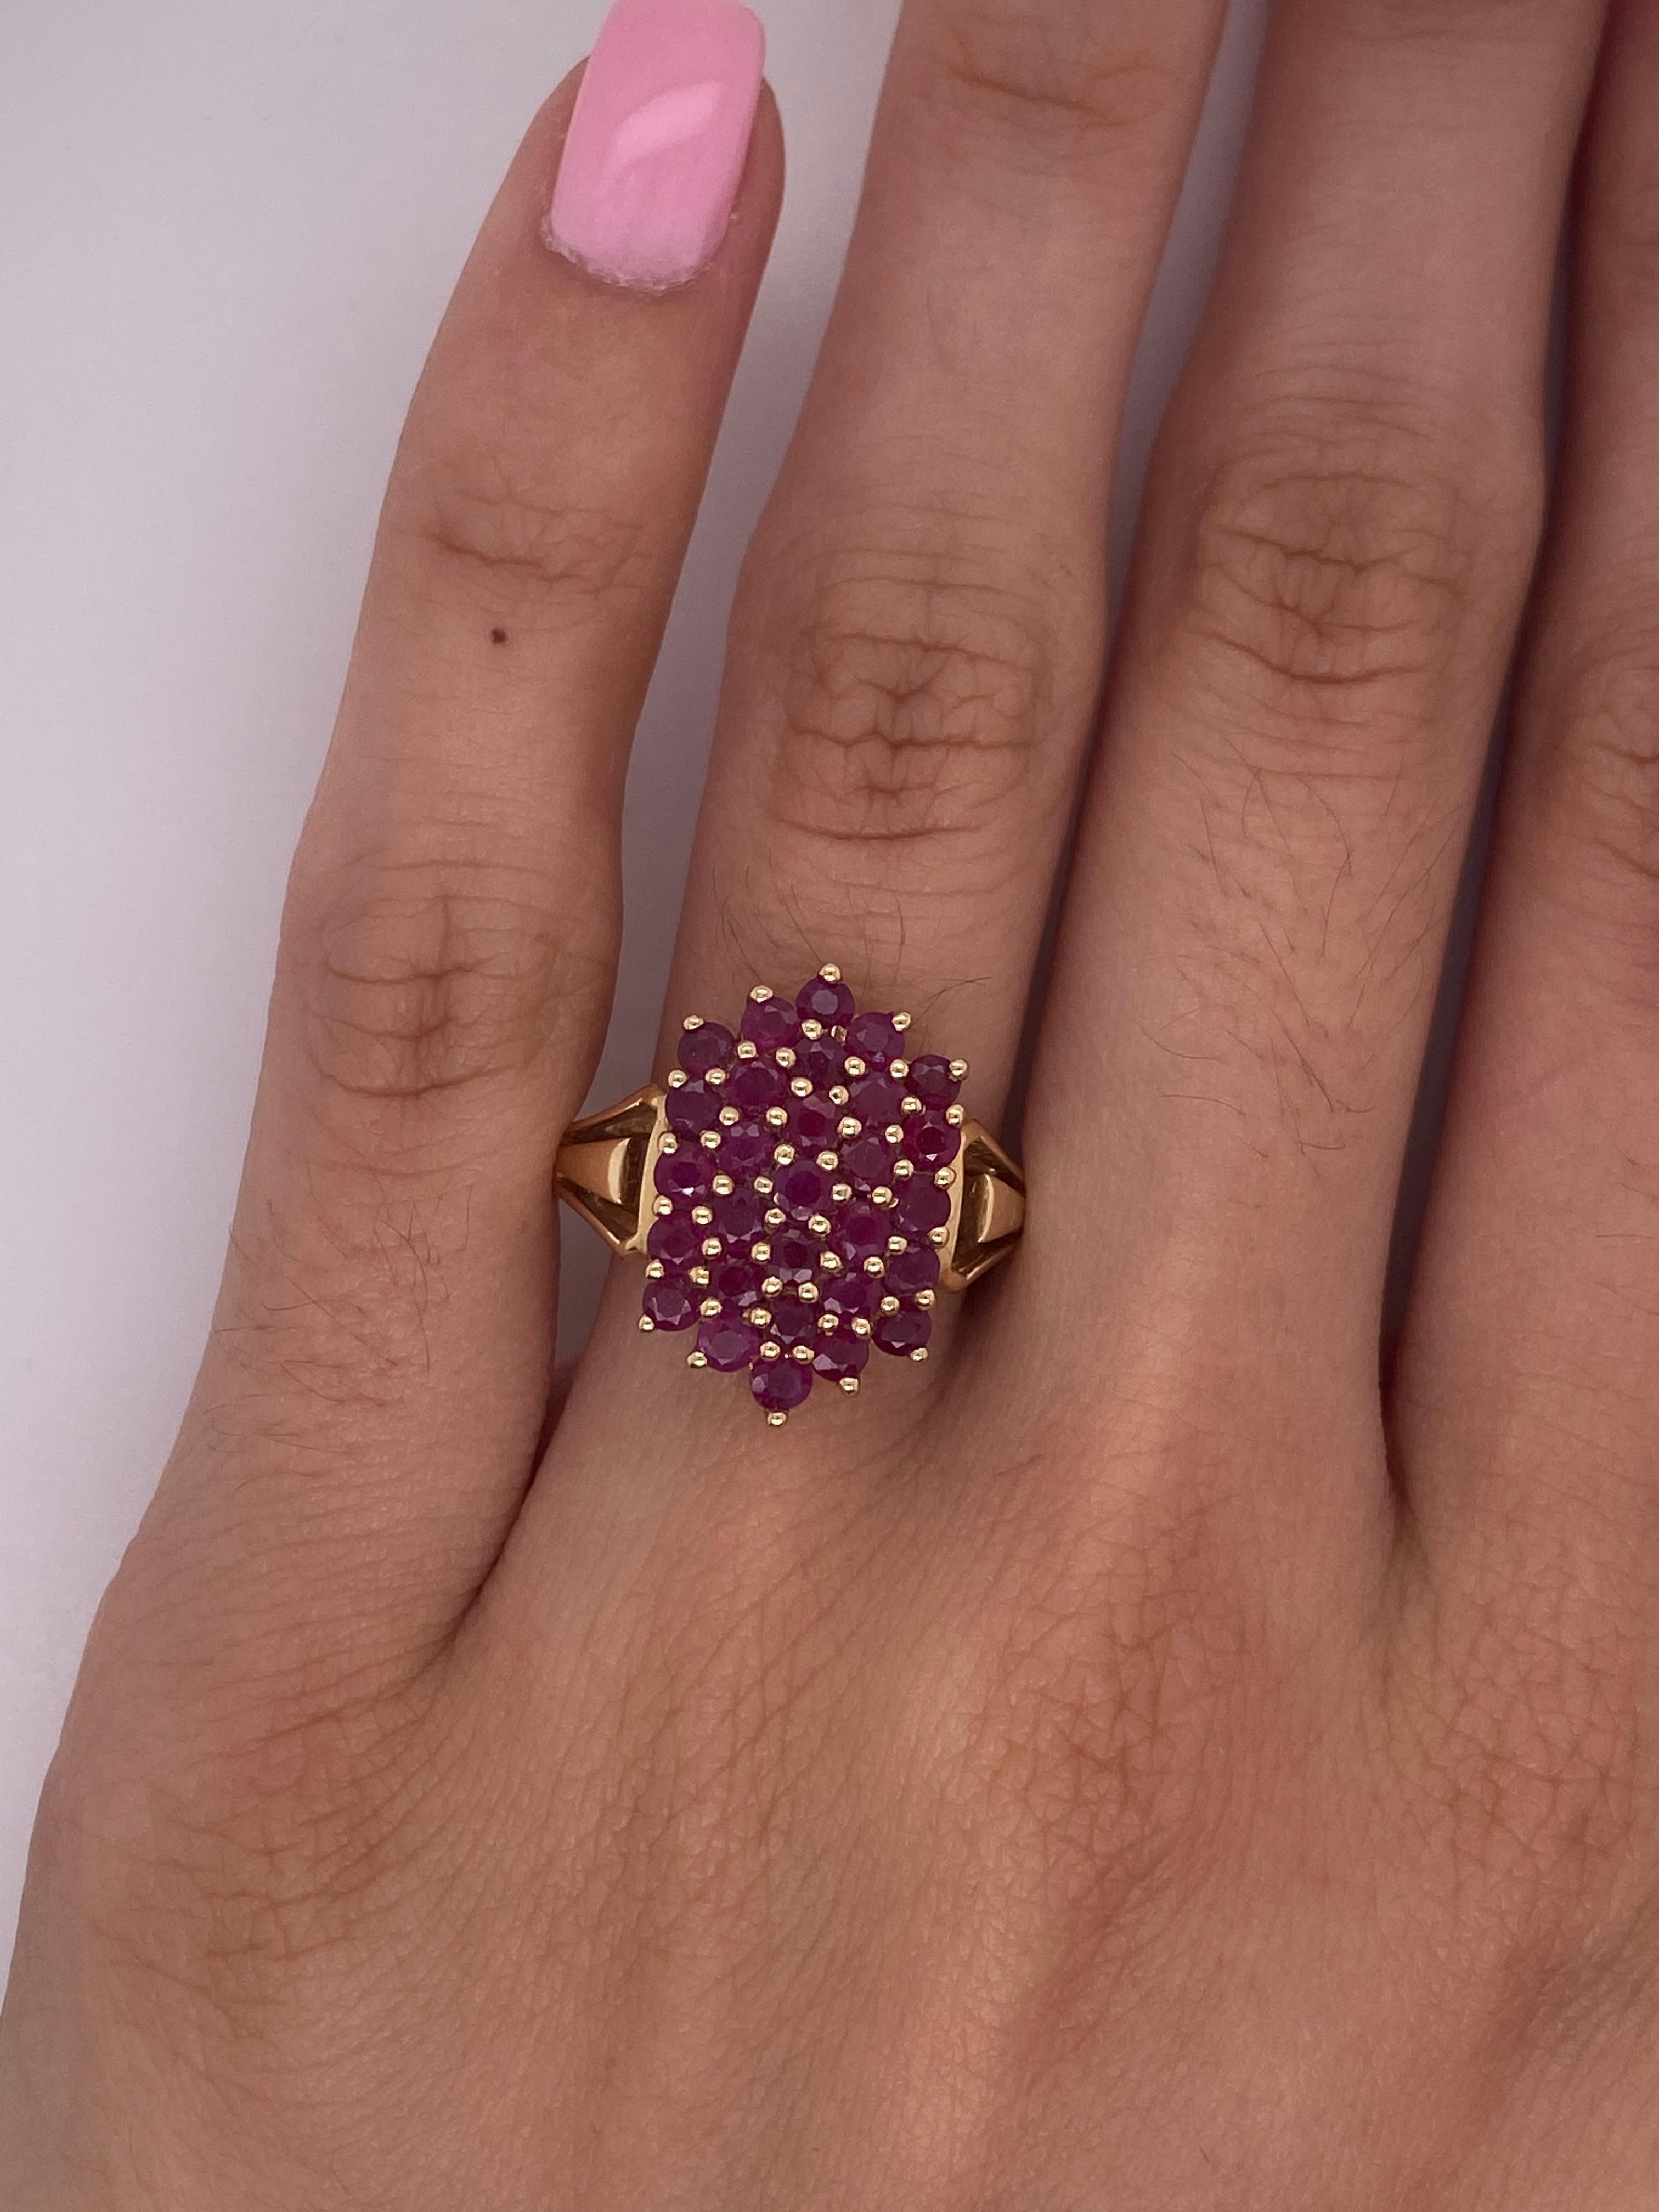 The beauty of this ring shines brightest when it is on the hand. The rich red rubies are like a carpet of red rolling across your finger, set in tiers that stay low to your hand and show their depth of color with almost every shift and turn of your